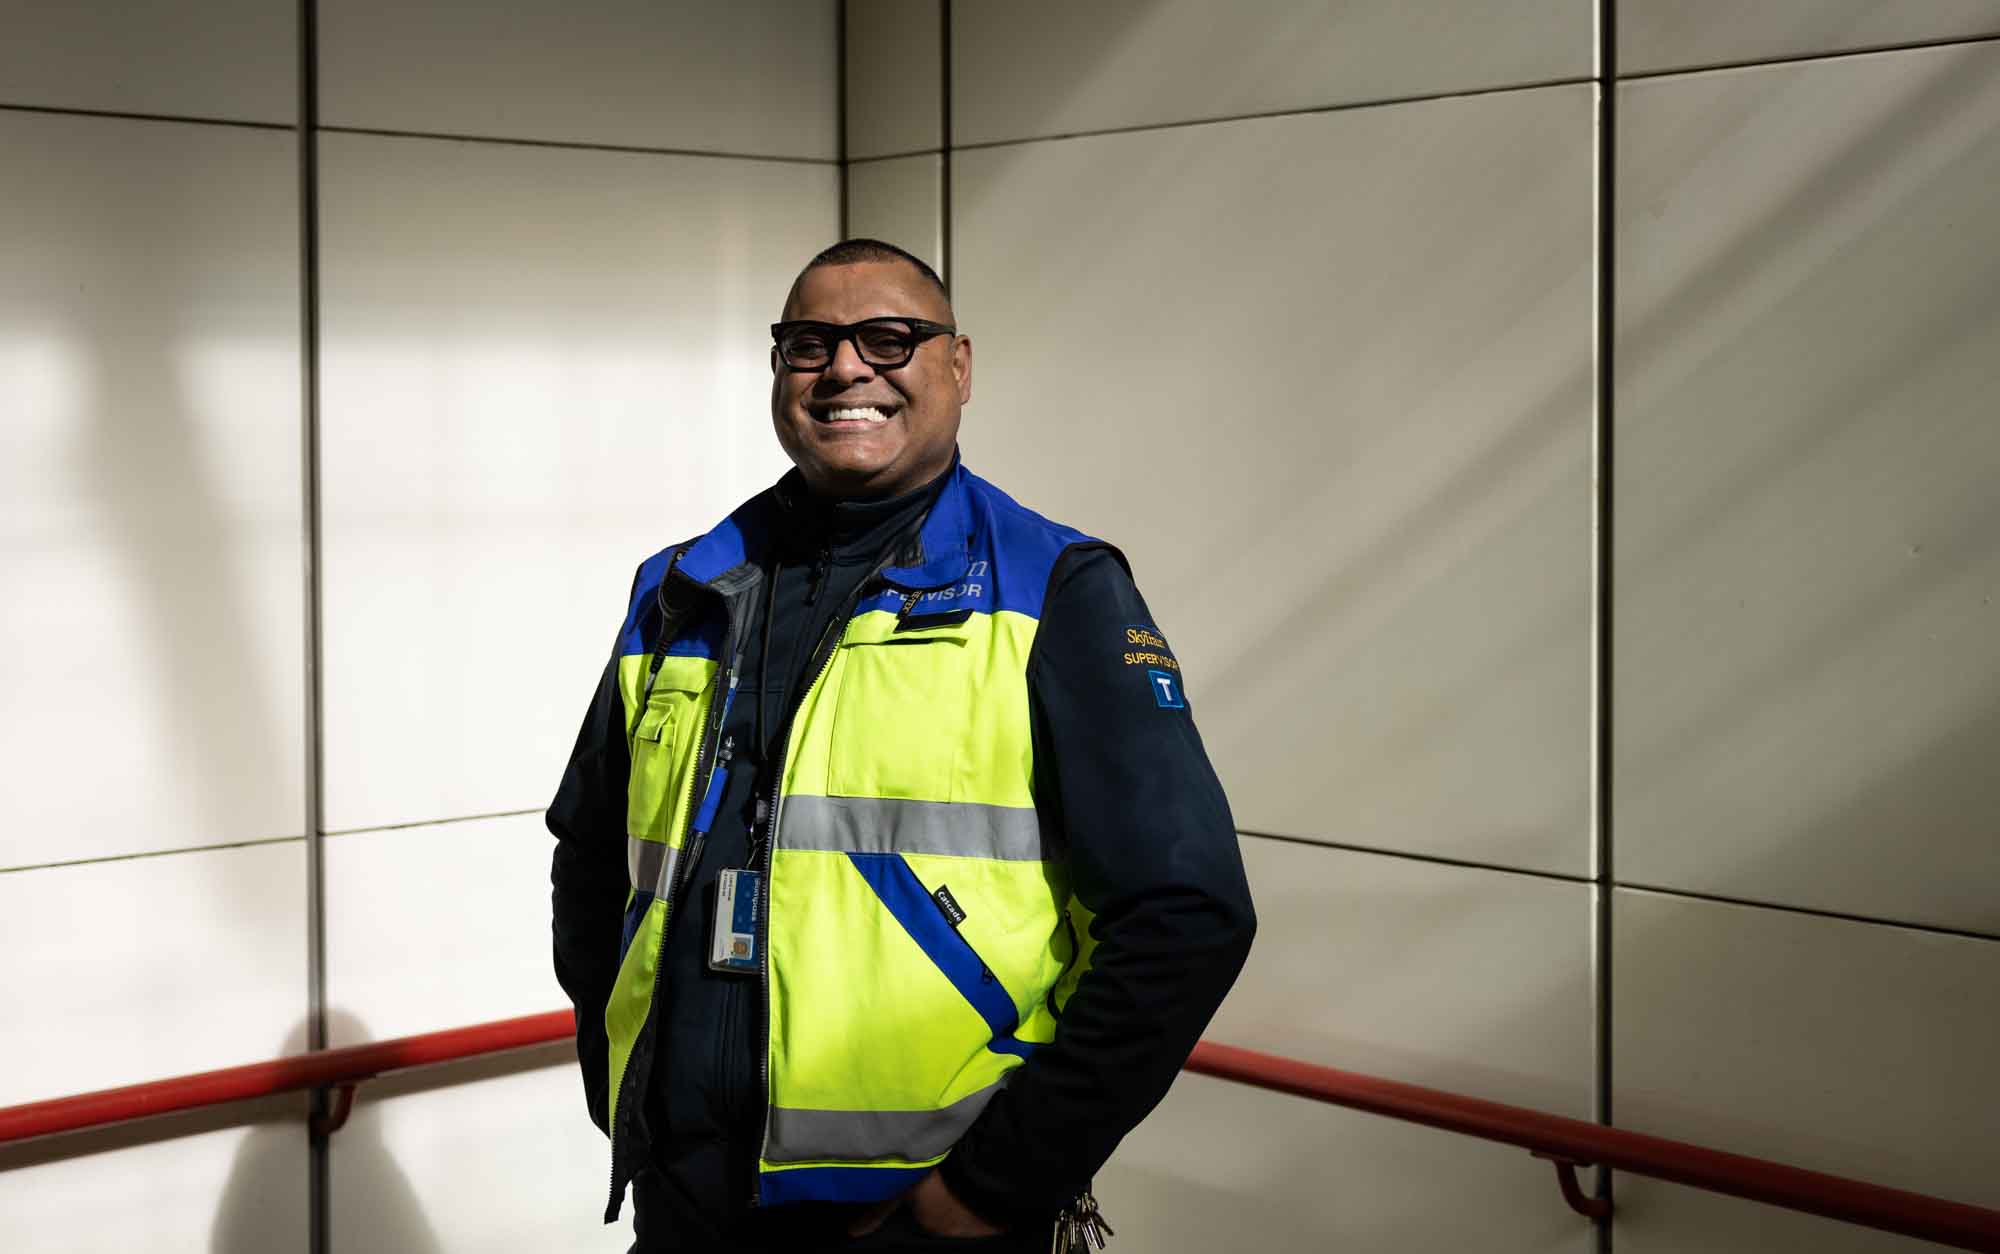 SkyTrain Field Operations Supervisor Lance Hakim is one the many people who keep this region moving.